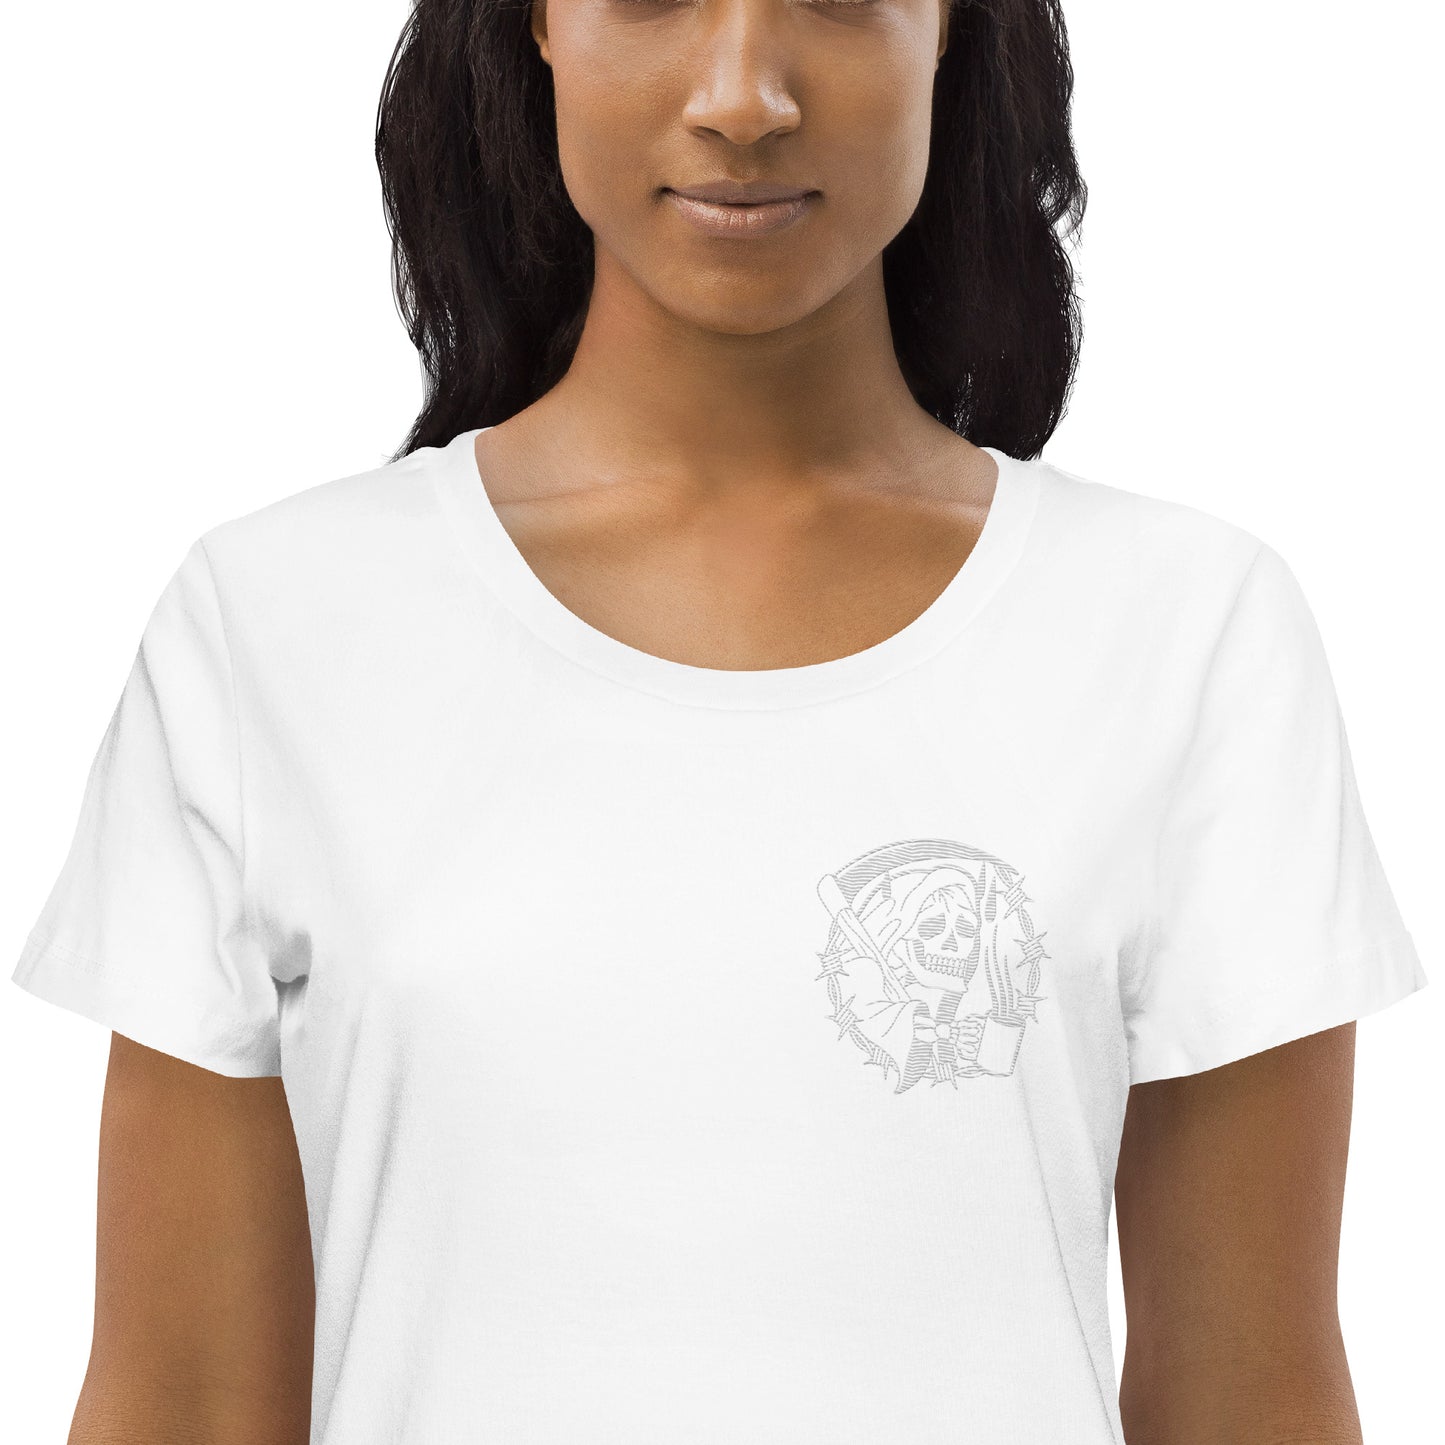 Black Death Women's Fitted Eco Tee